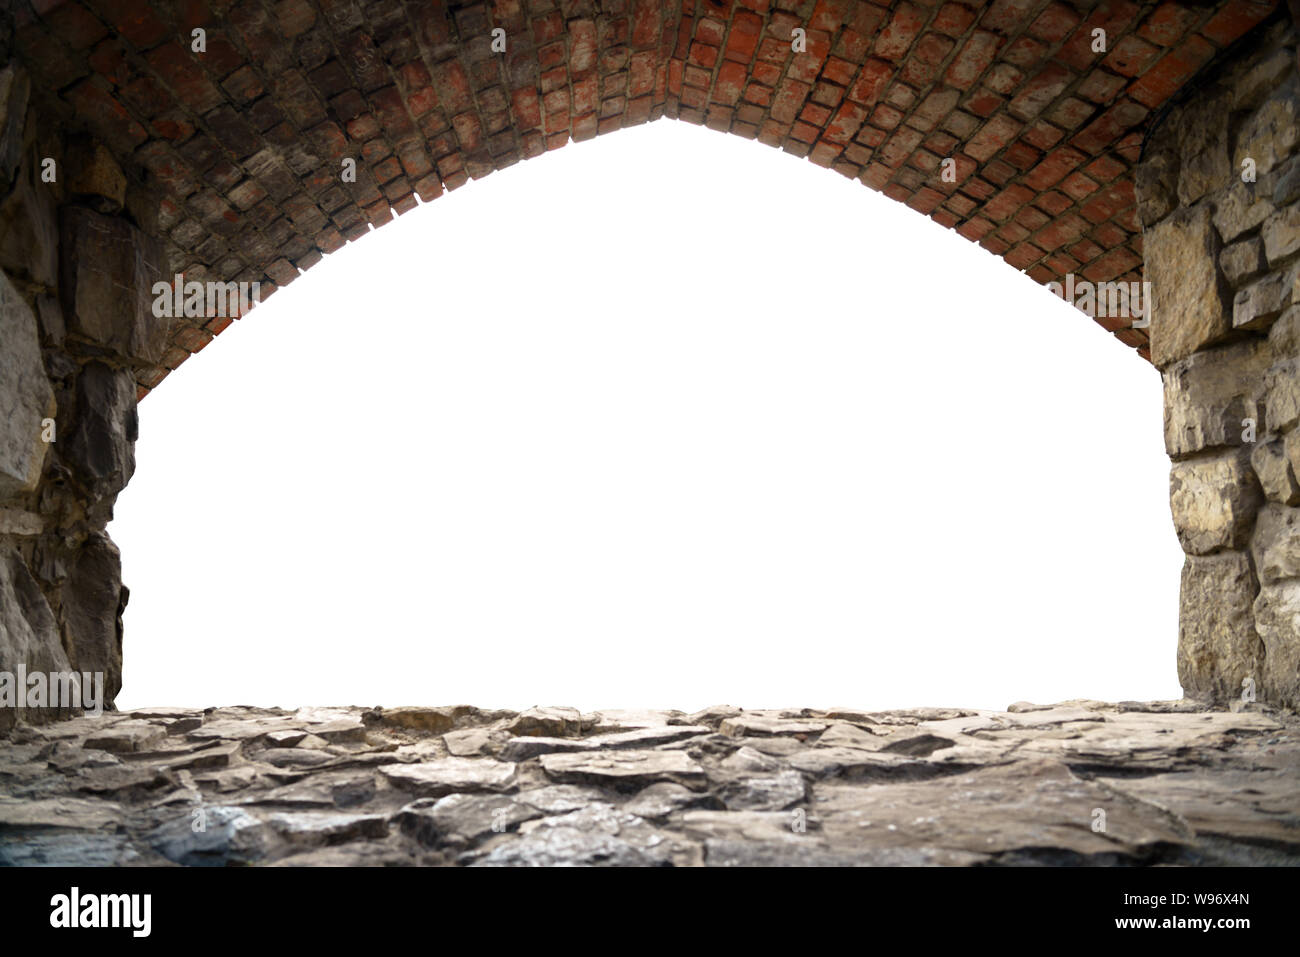 Ancient Historic Brick window arch frame with white blank background Stock Photo